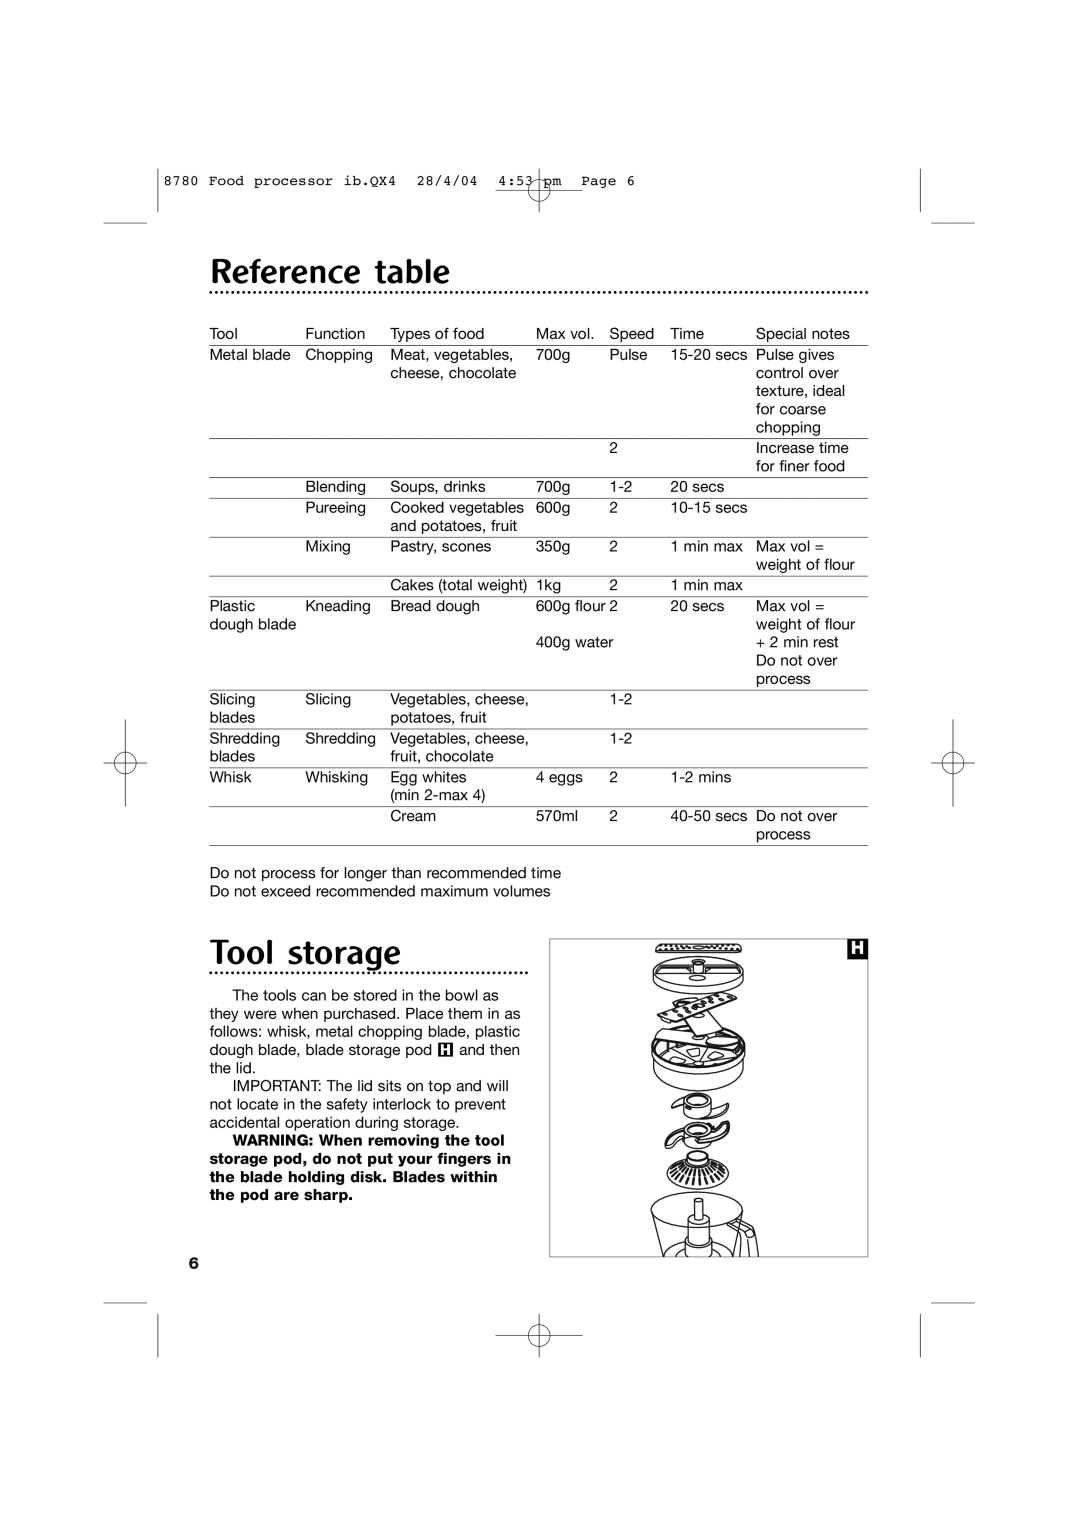 Morphy Richards 8780 manual Reference table, Tool storage 